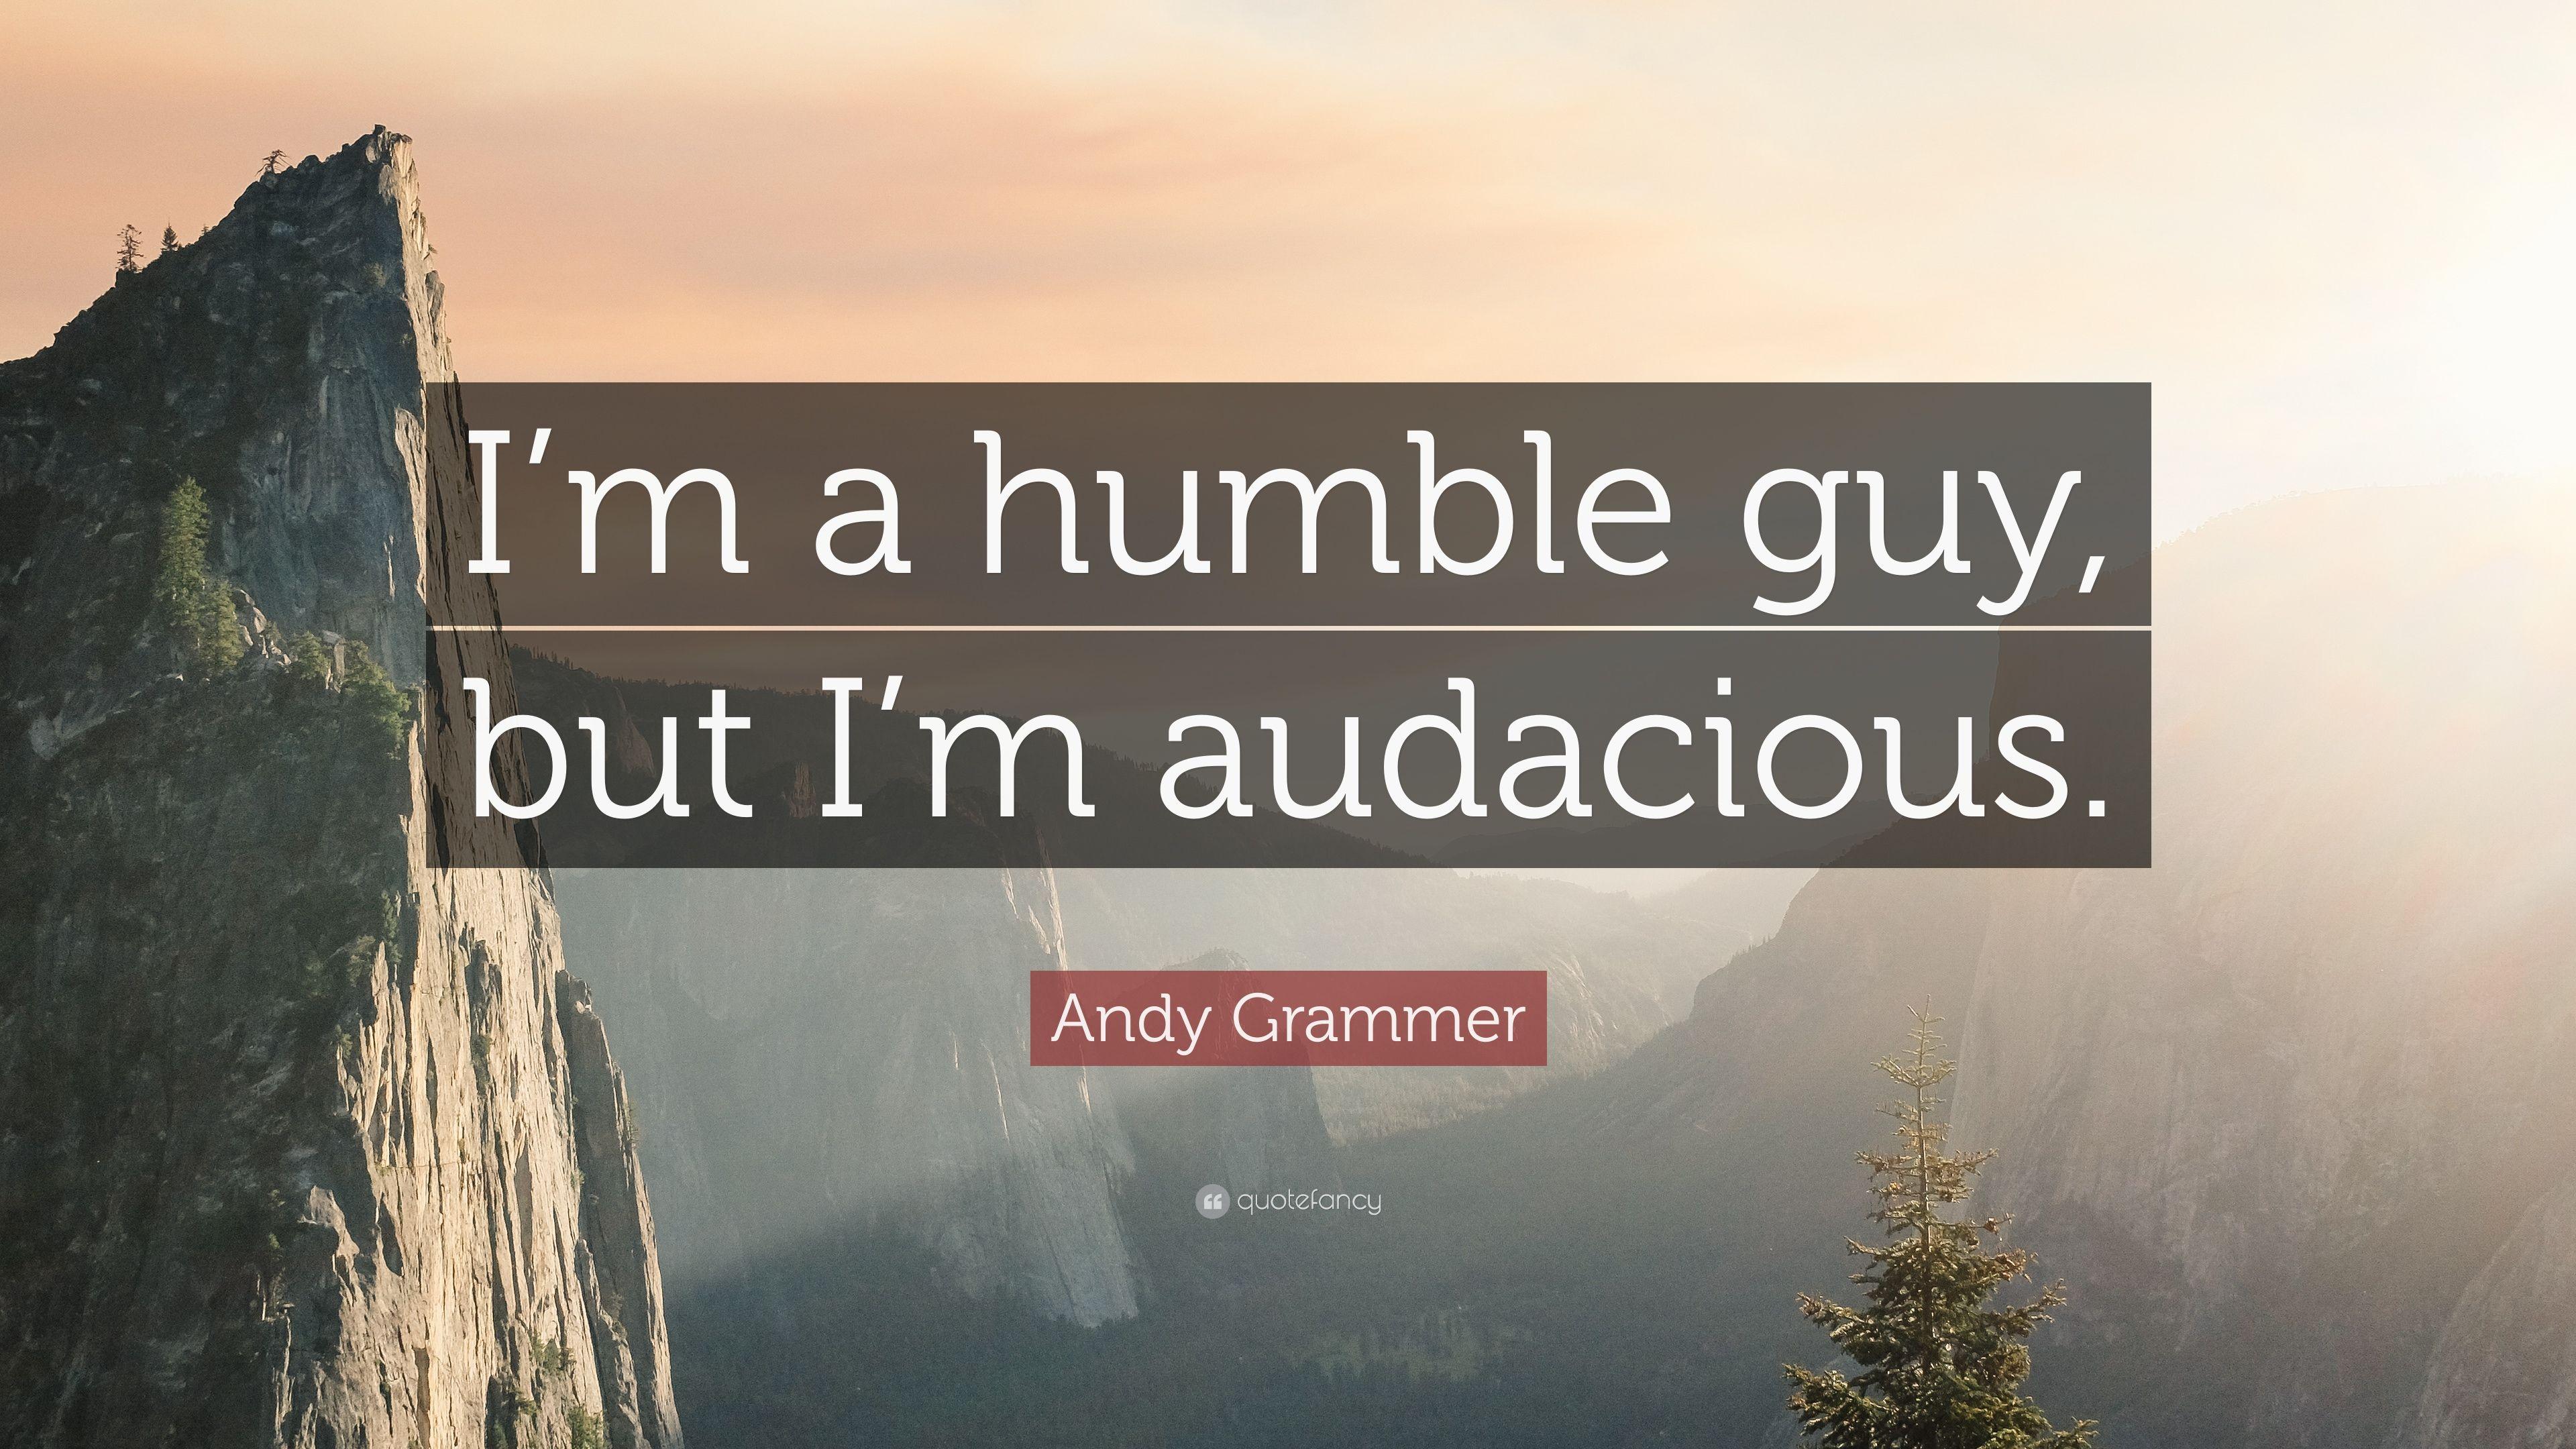 Andy Grammer Quotes (5 wallpaper)